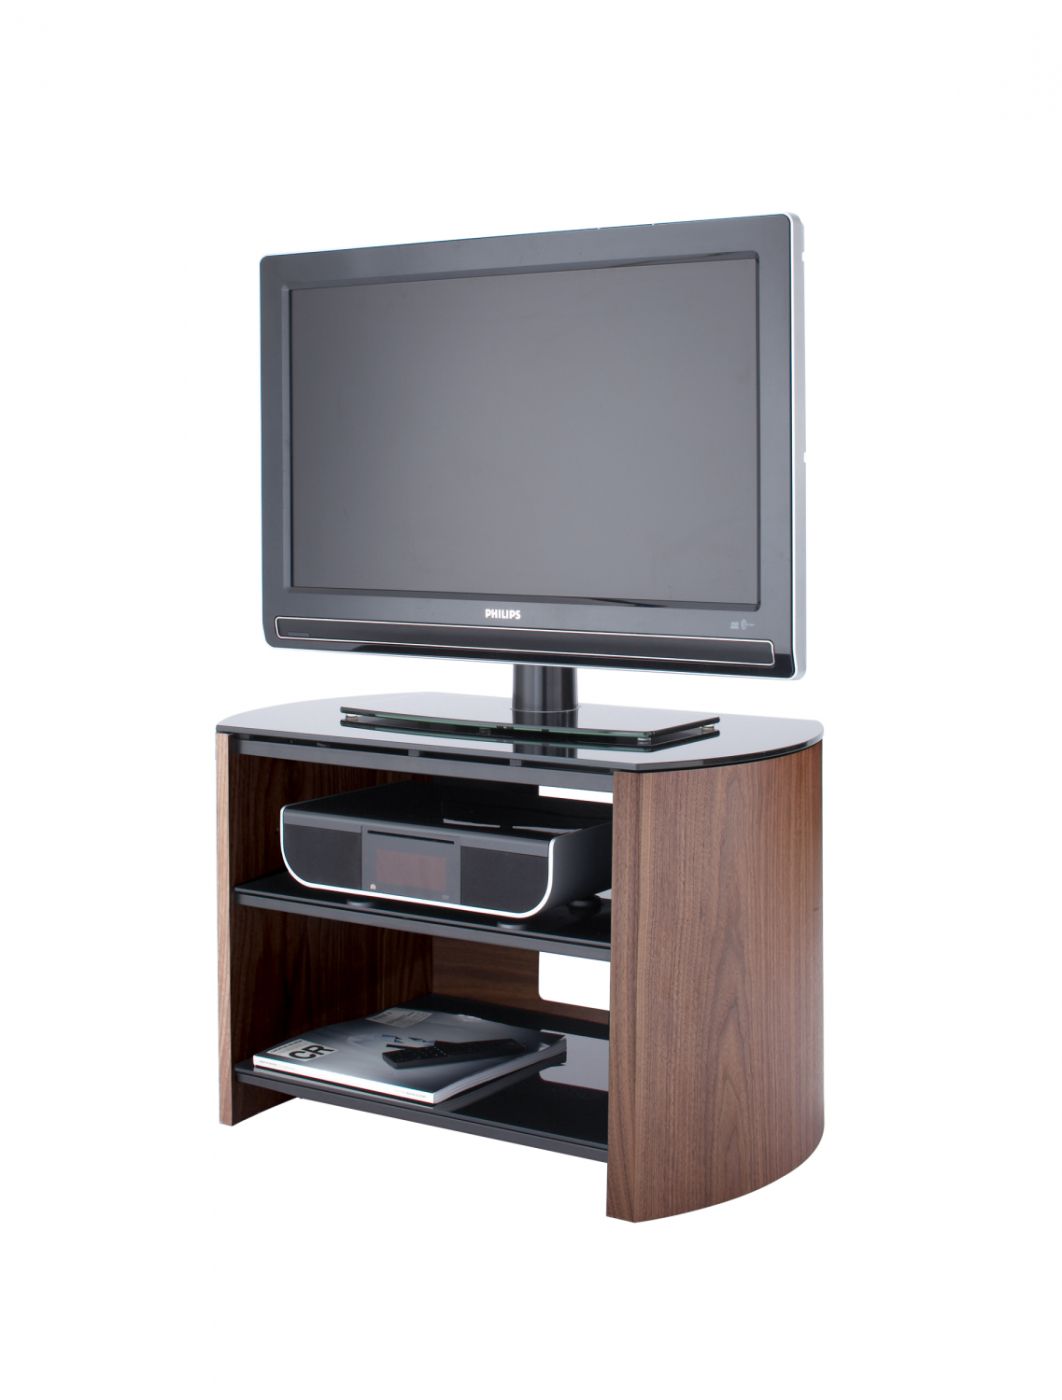 Alphason Fw750 W/b Finewoods Tv Stand | 121 Tv Mounts Throughout Alphason Tv Cabinet (View 1 of 15)